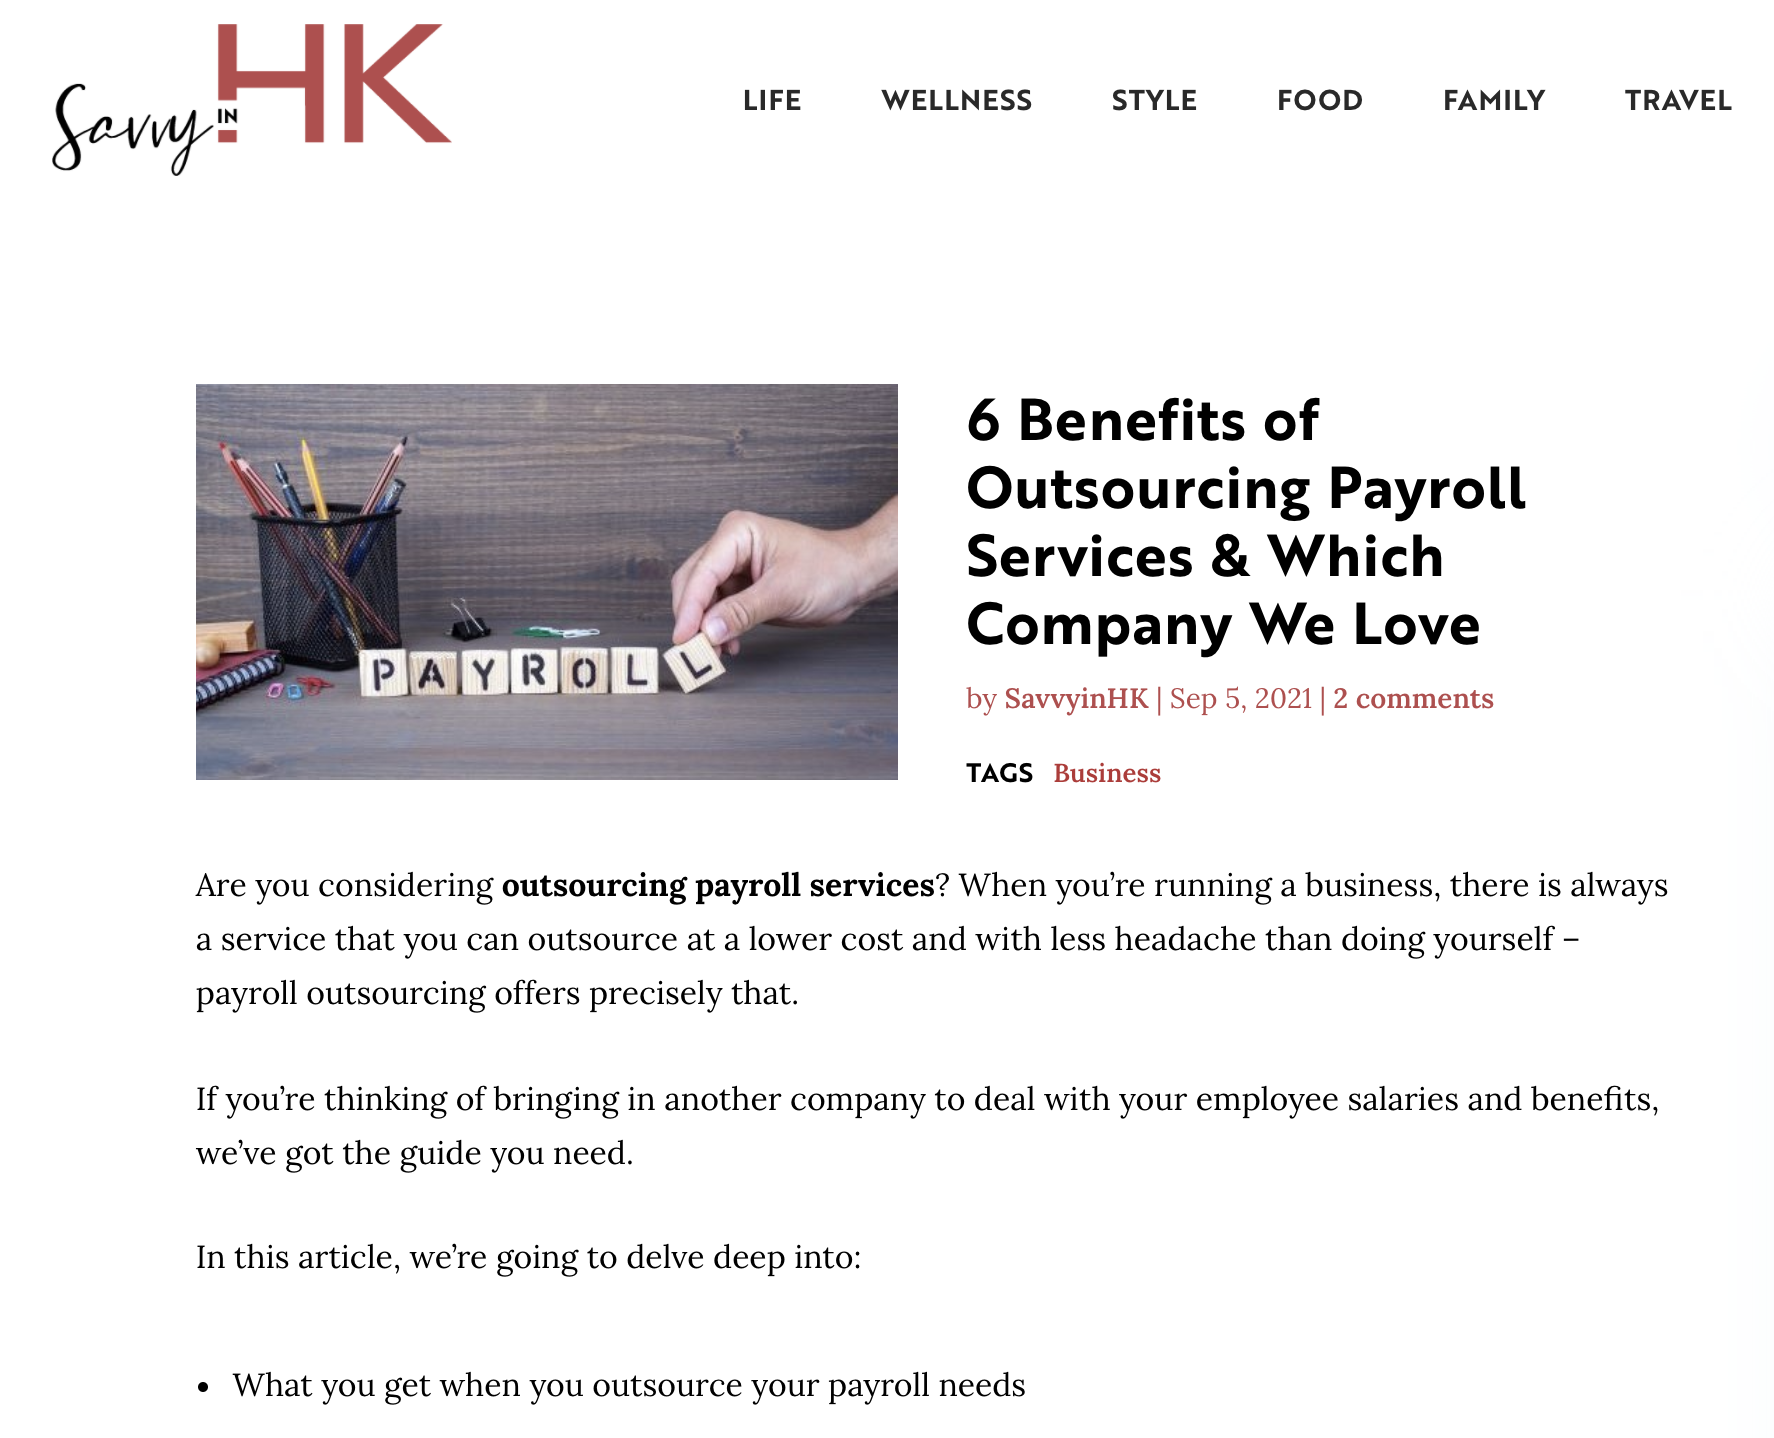 Savvy in HK blog on pinetree payroll services